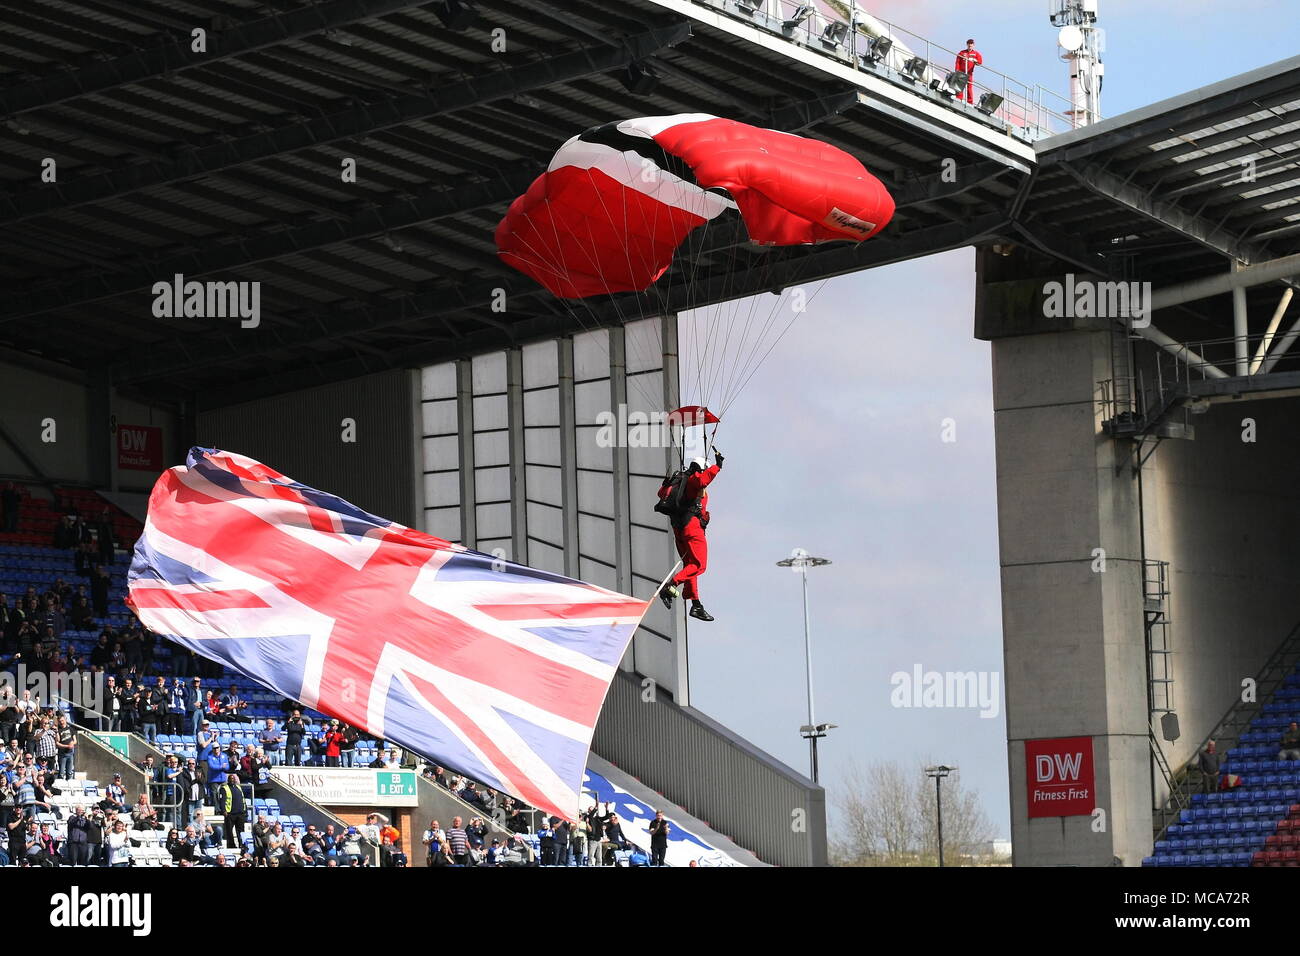 Wigan, Greater Manchester, UK. 14th April, 2018. The Red Devils land on the pitch ahead of the Wigan Athletic v Rotherham United League One fixture at The DW Stadium. Credit: Simon Newbury/Alamy Live News Stock Photo